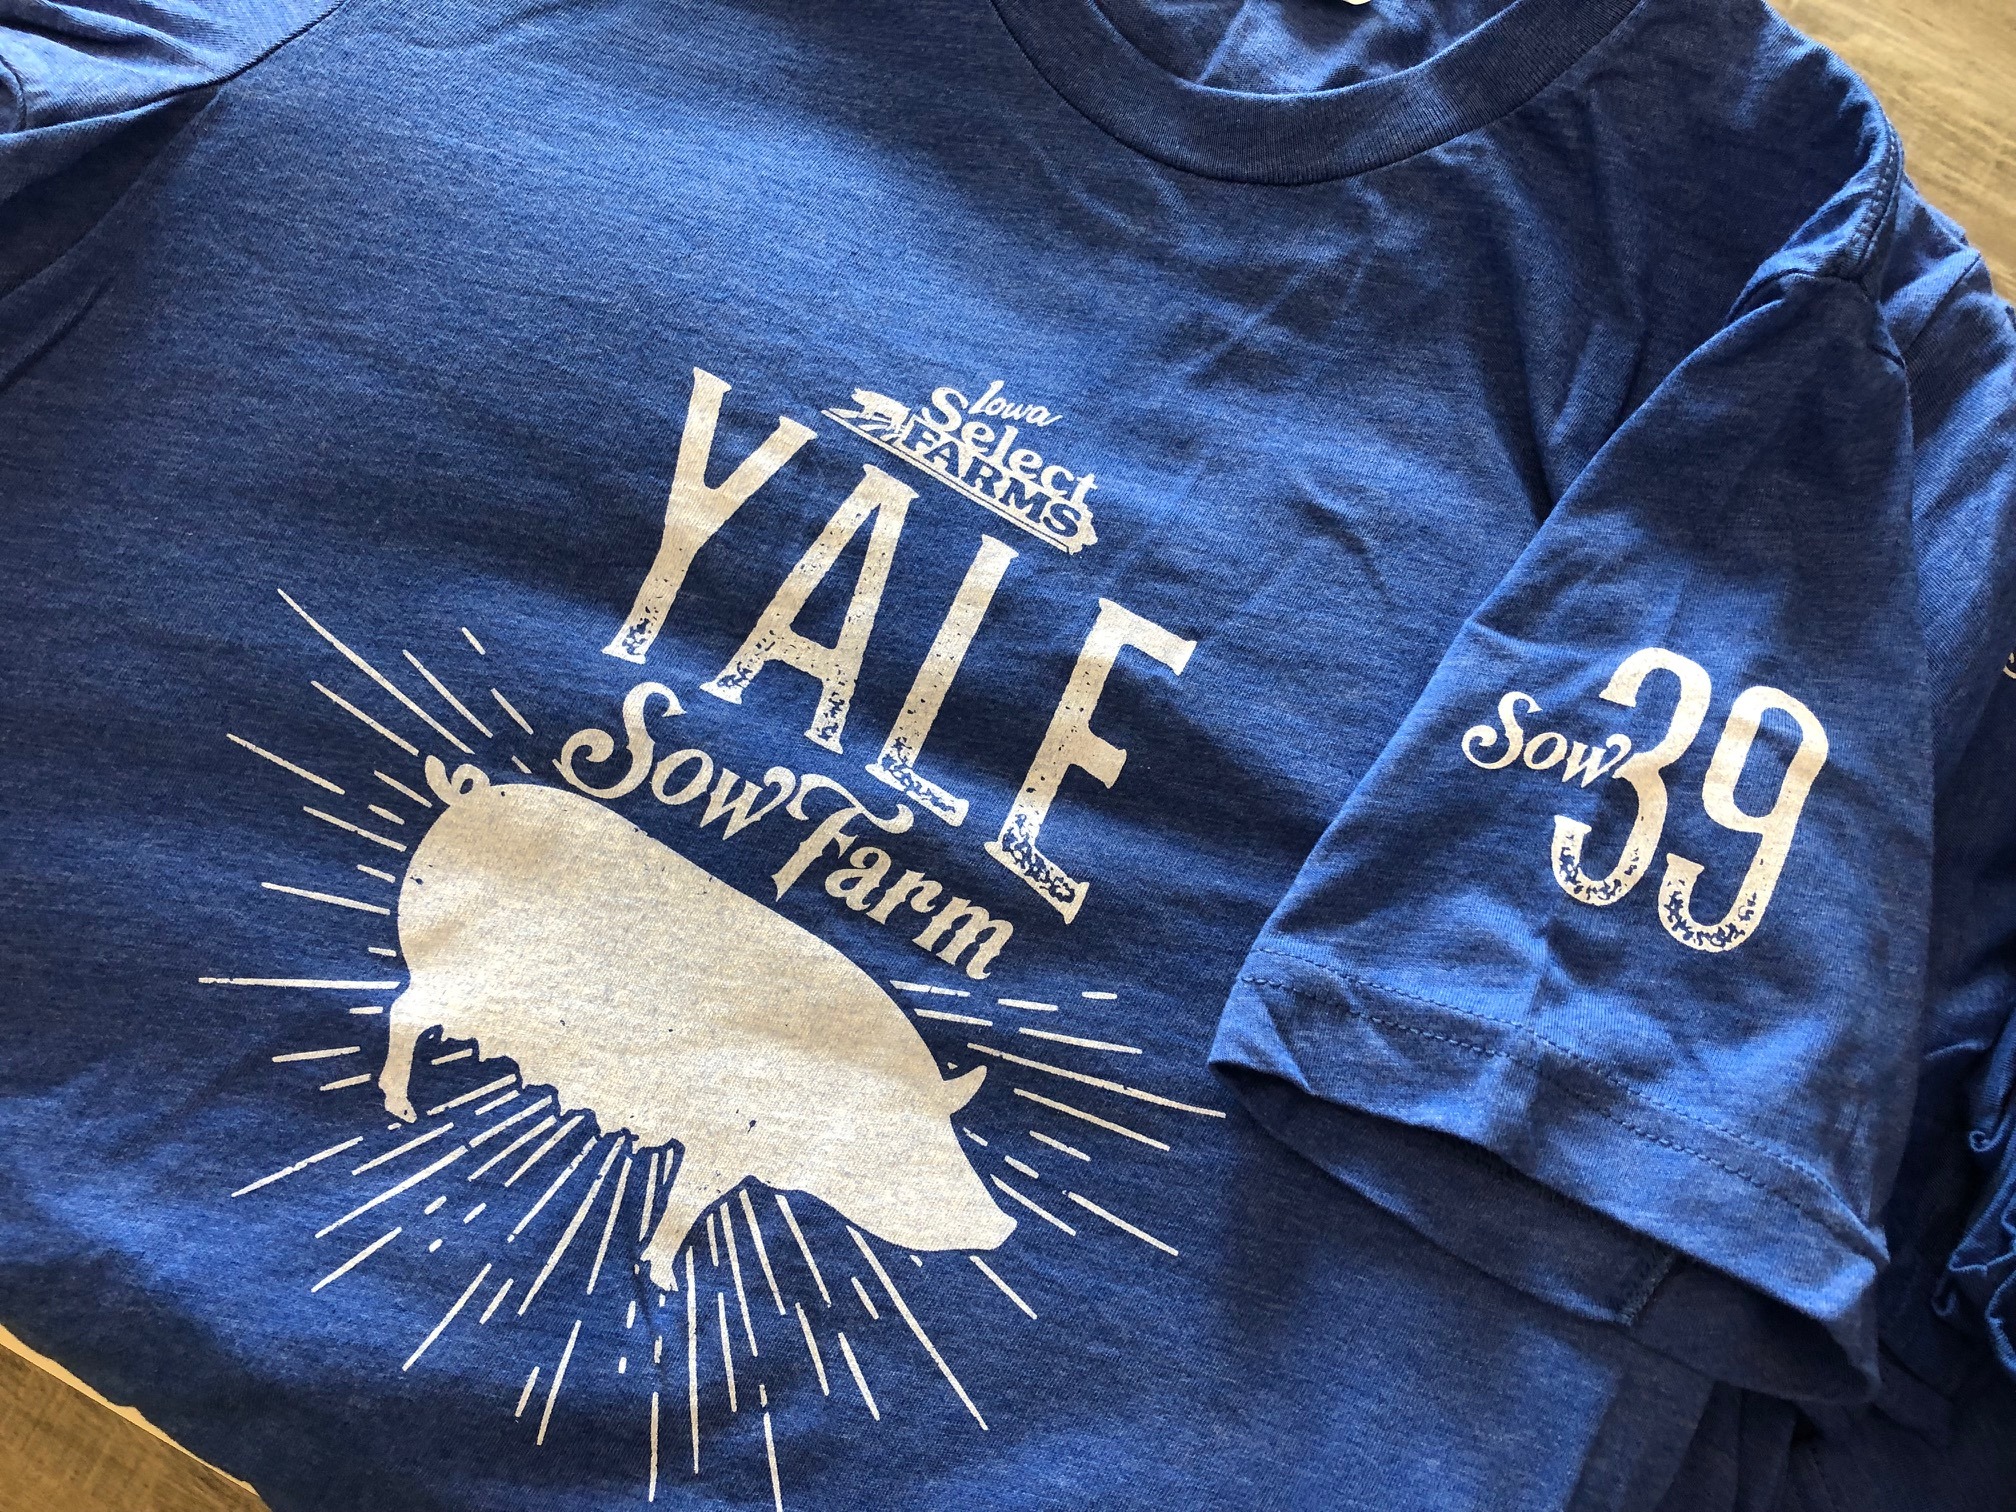 Yale Sow Farm t-shirts for Employees